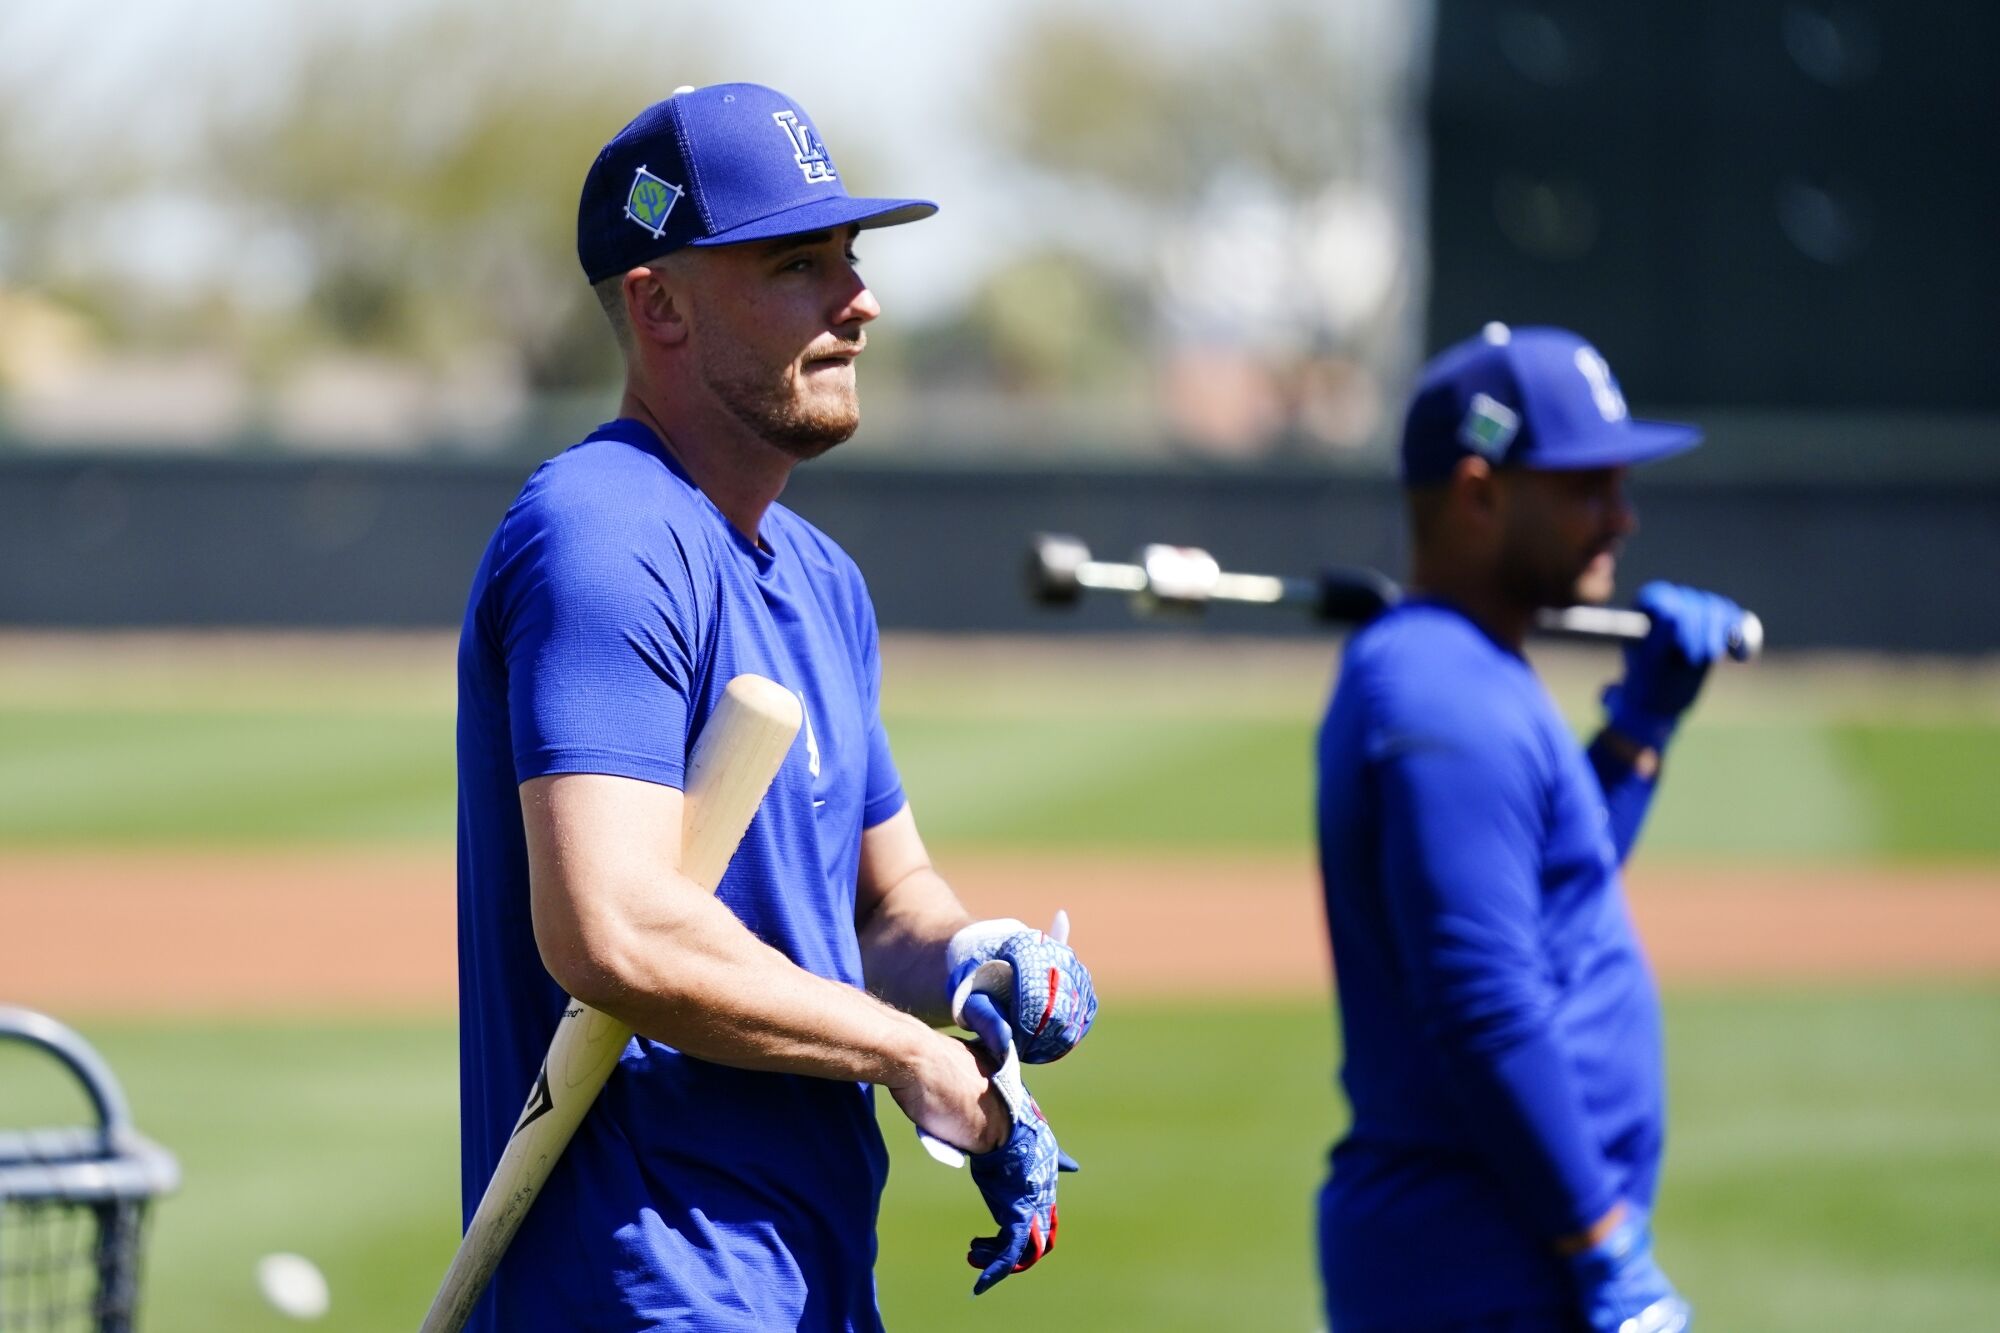 The Dodgers' Cody Bellinger, left, and Tomás Telis wait their turn for batting practice March 13 at spring training.